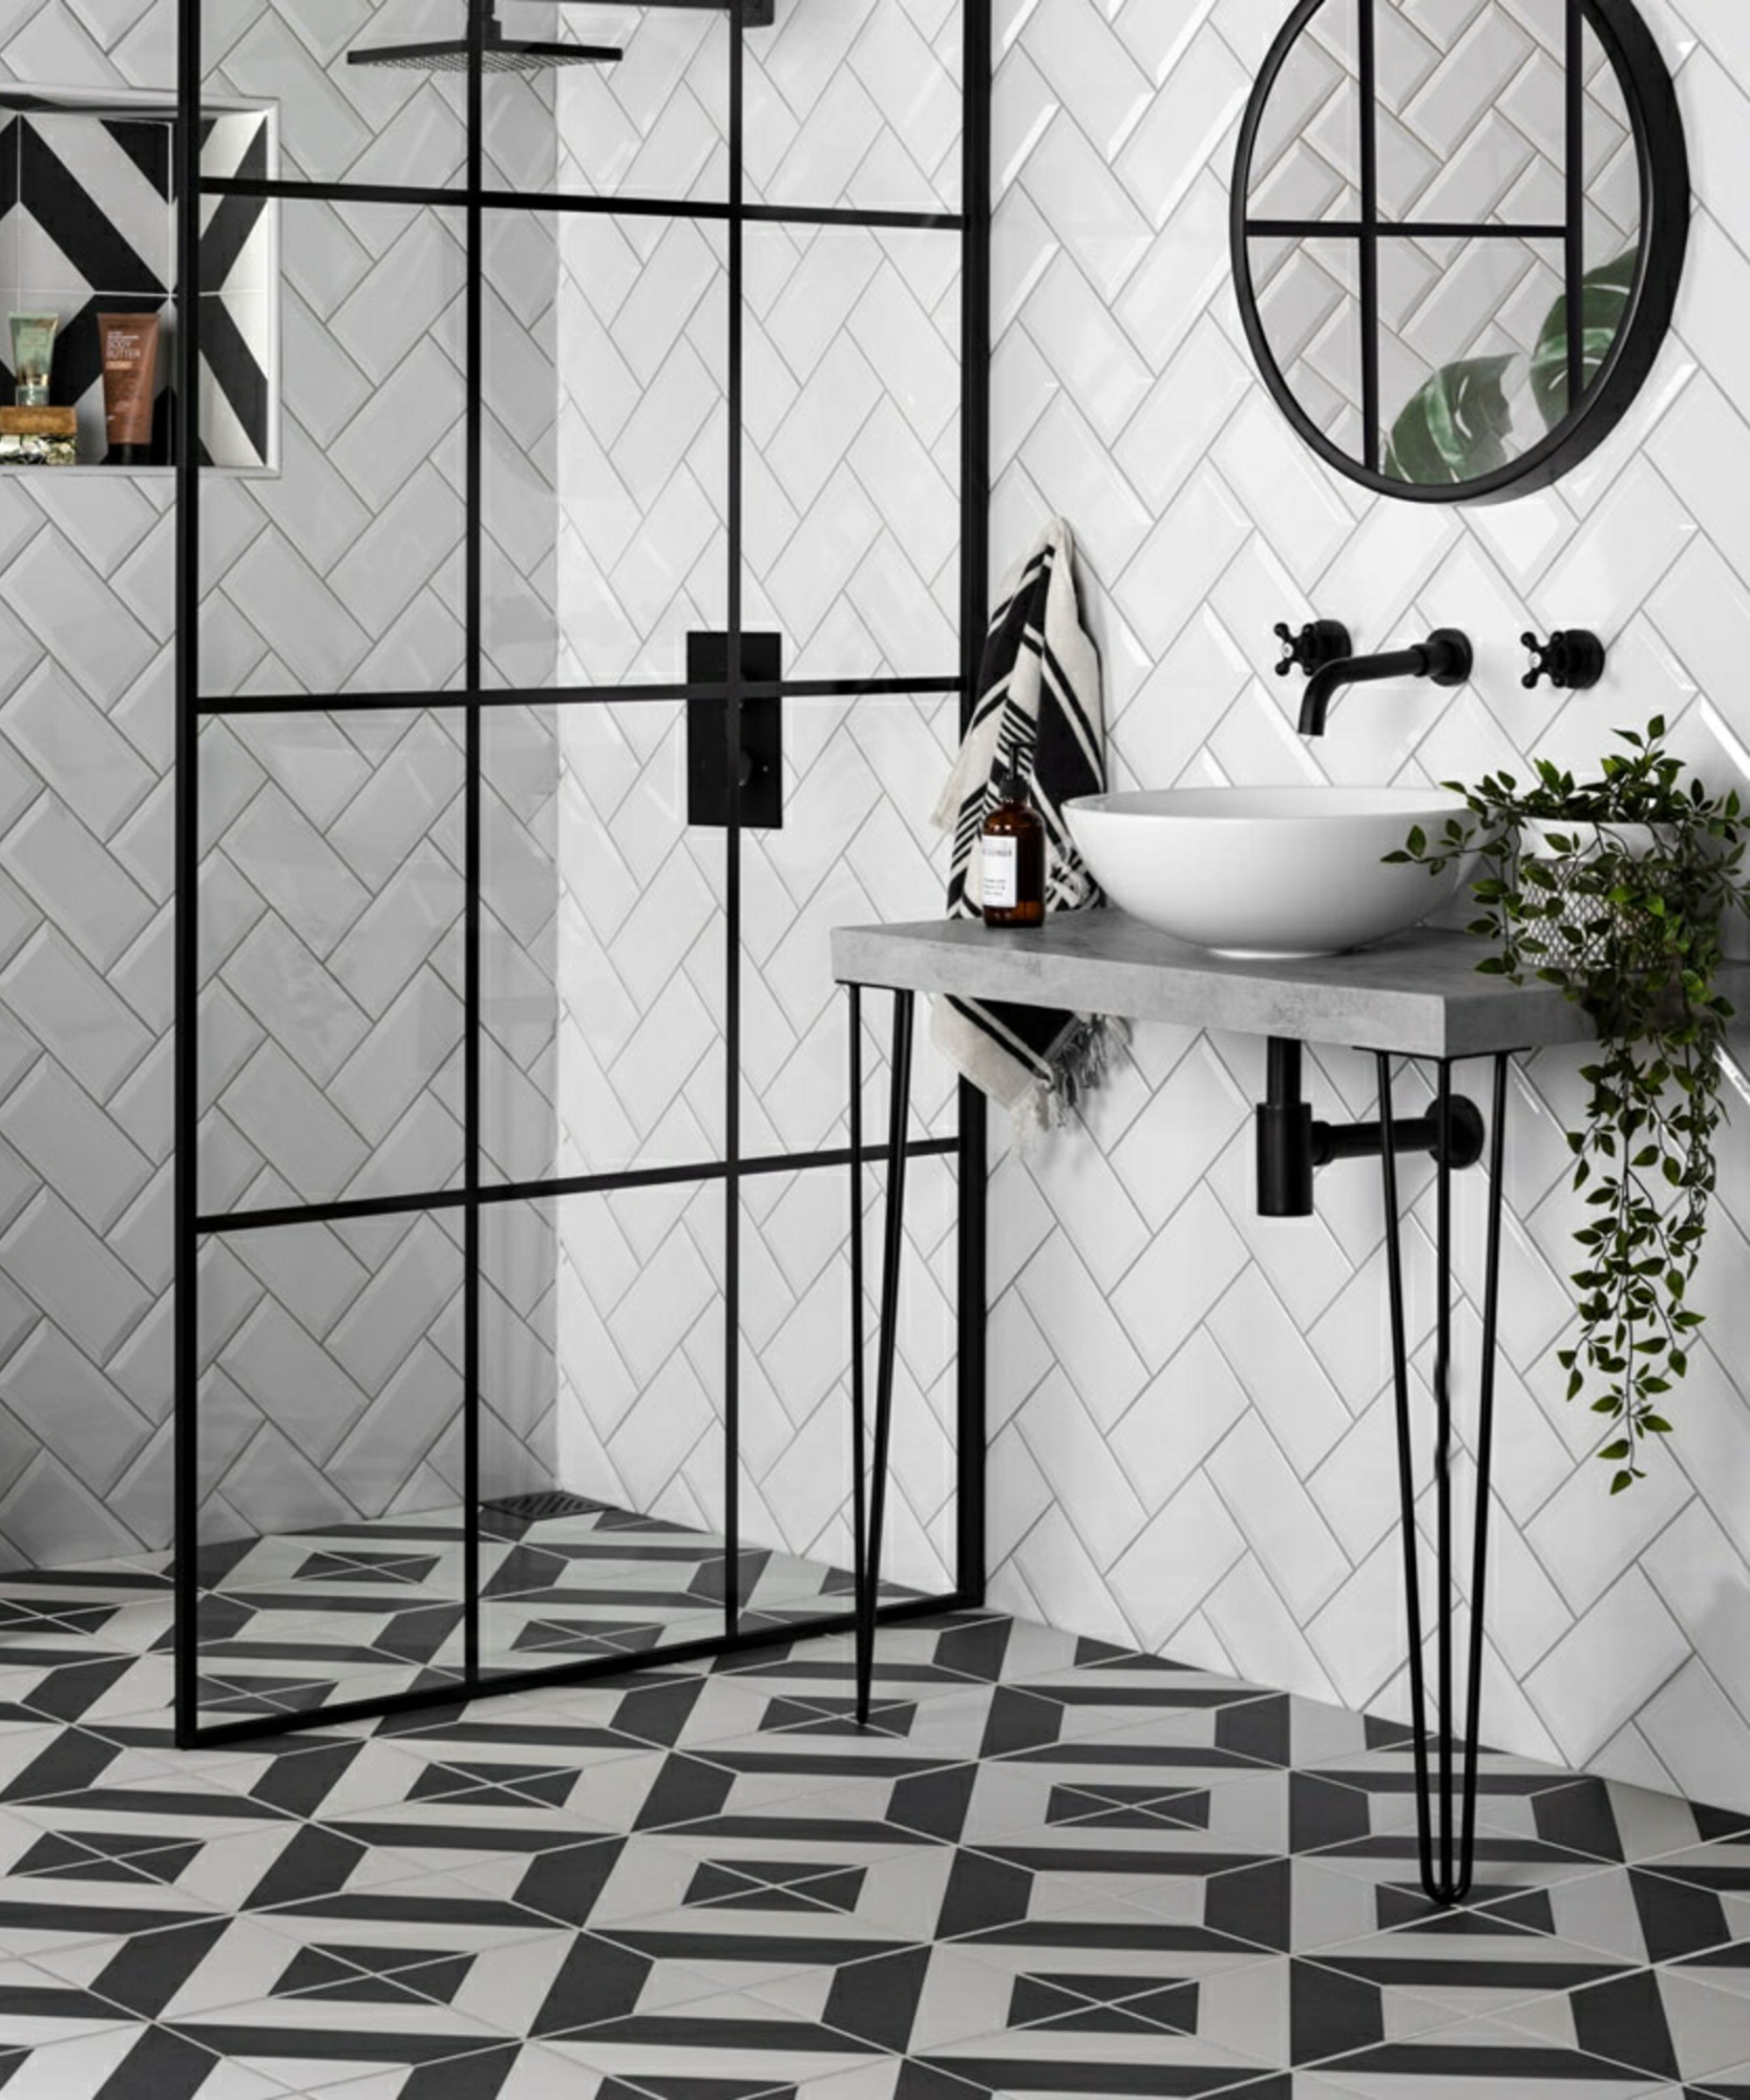 black and white chevron wall tiles in shower room with hairpin legged vanity unit and black framed shower screen